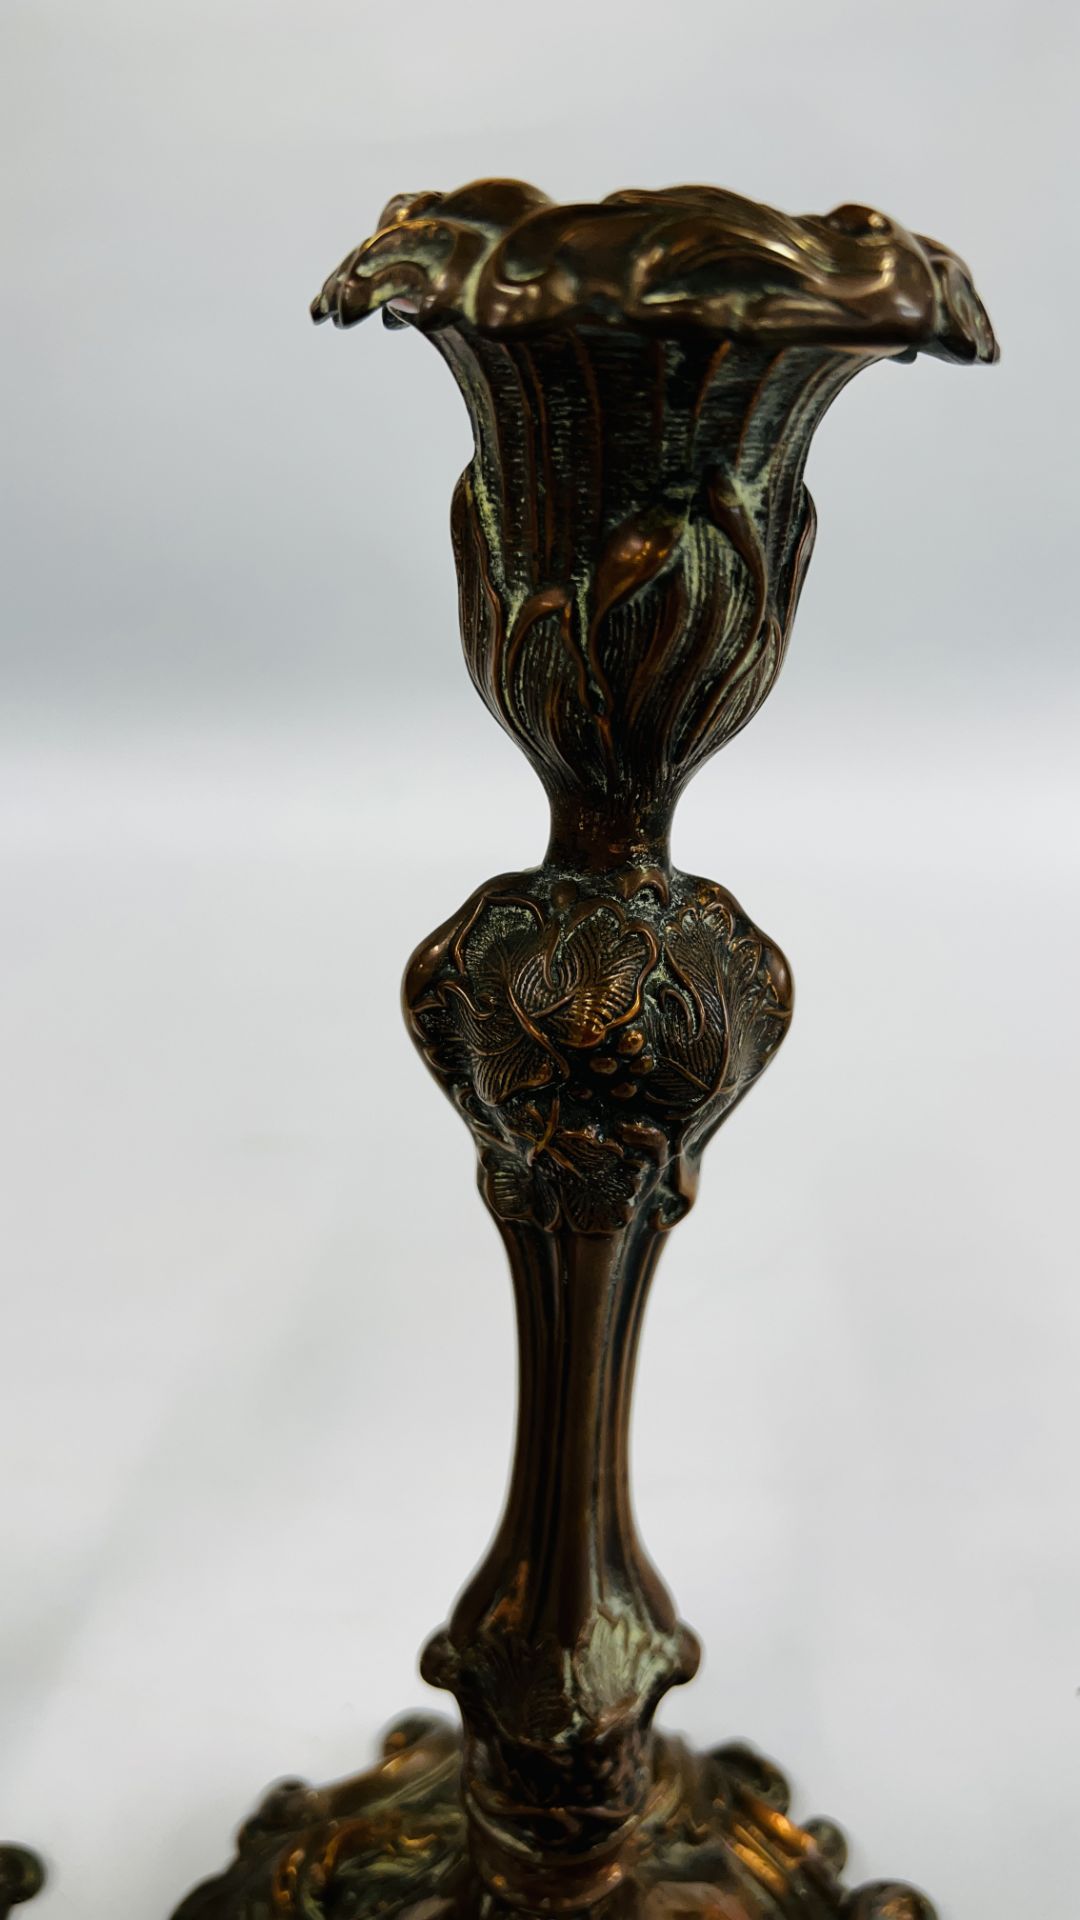 A PAIR OF ORNATE C19TH COPPER CANDLESTICKS WITH DETACHABLE SCONCES - HEIGHT 27CM. - Image 12 of 20